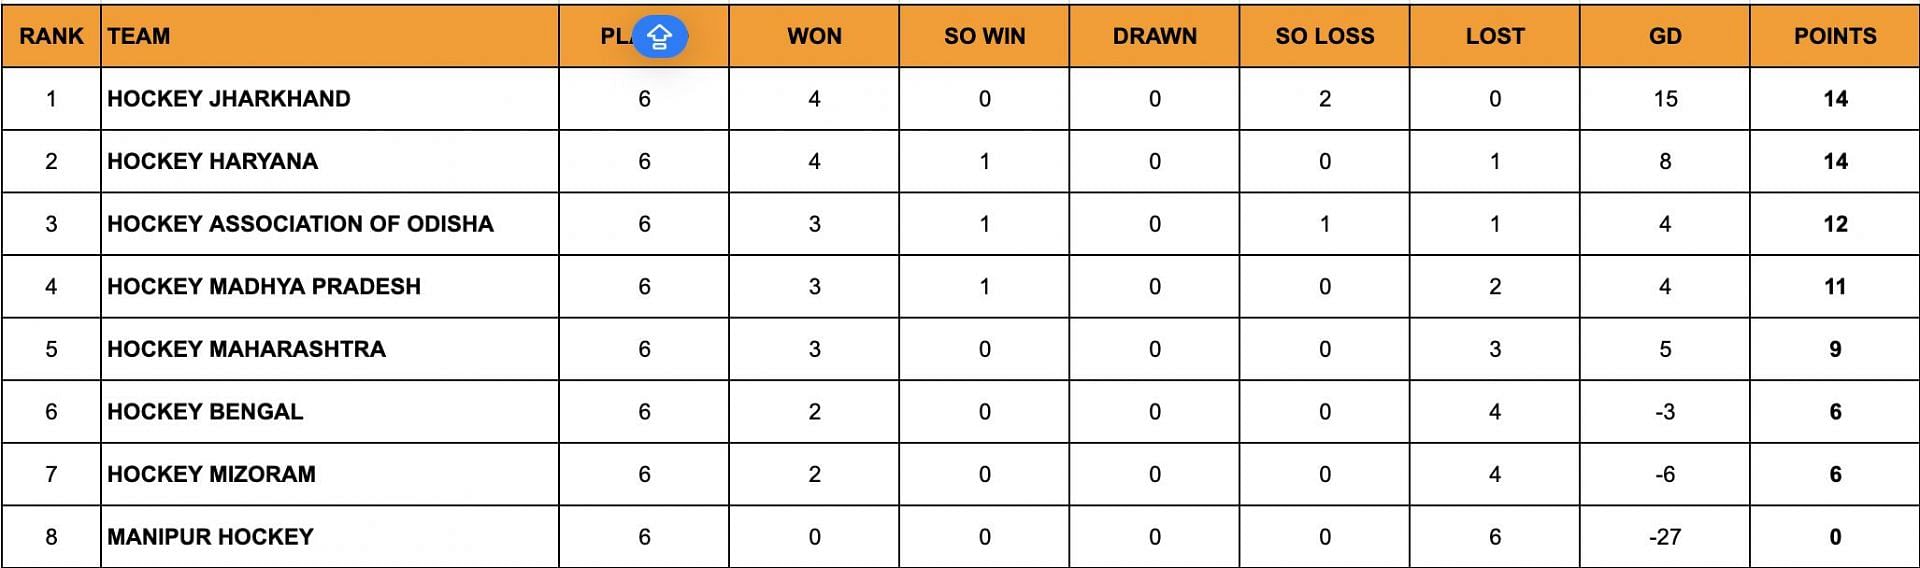 A look at the standings after Day 6.